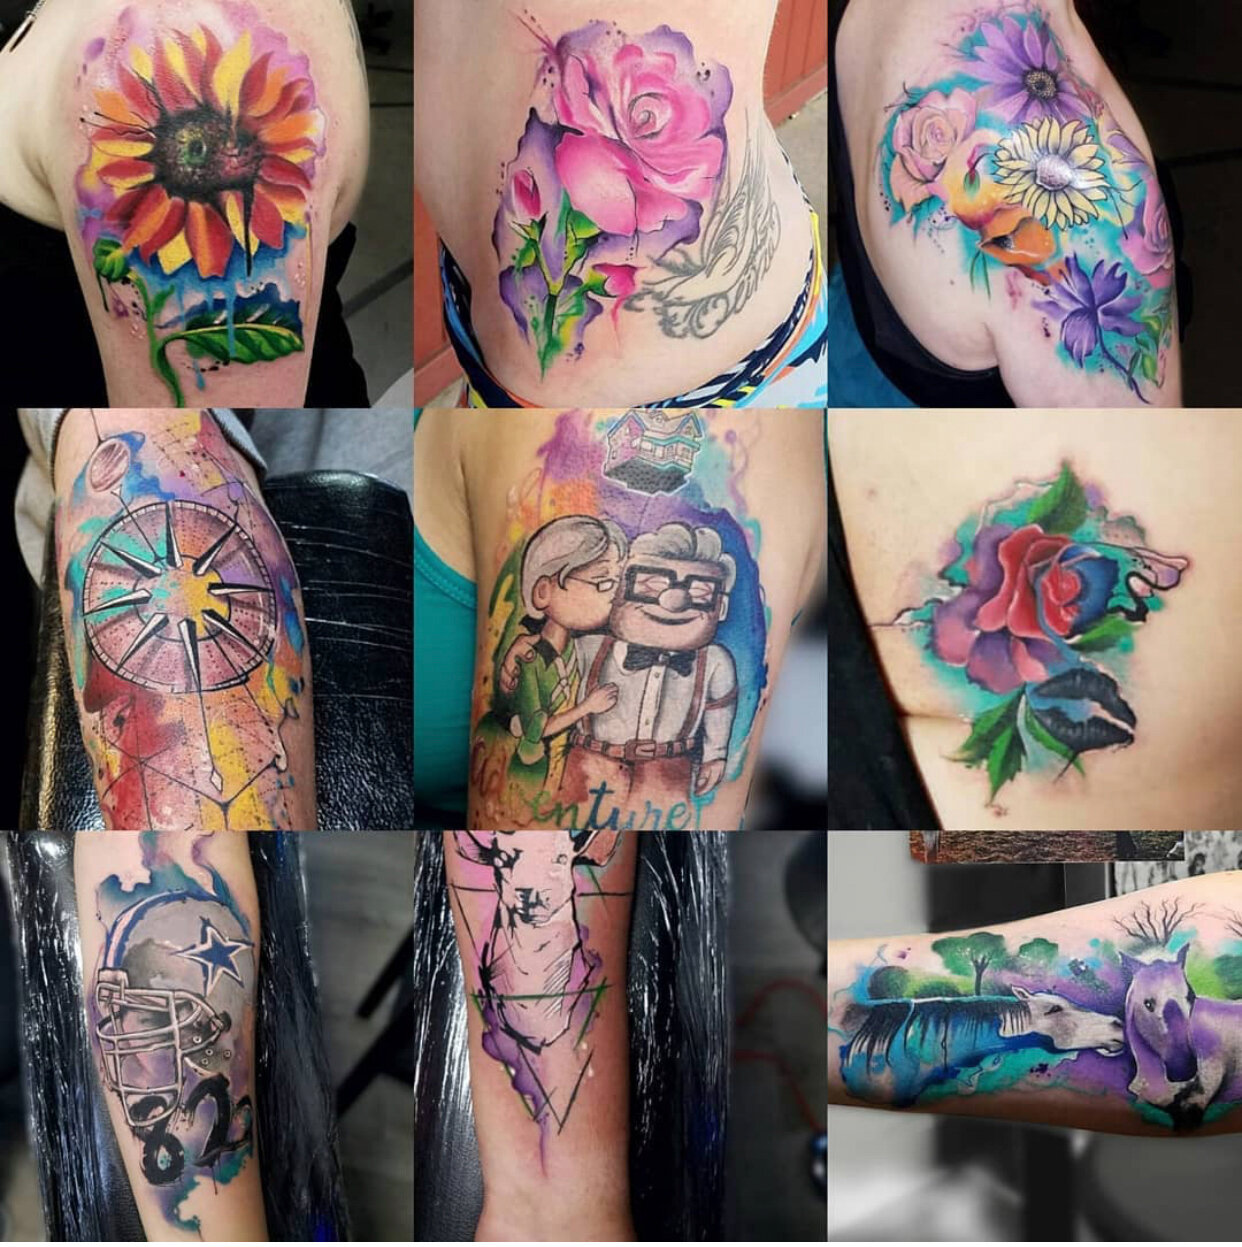 Certified Tattoo Studios on Instagram We invite you  your friends to  join us for Walkin Weekend at Colorados favorite tattoo studio  Experience 5 Tattooing  Piercing with